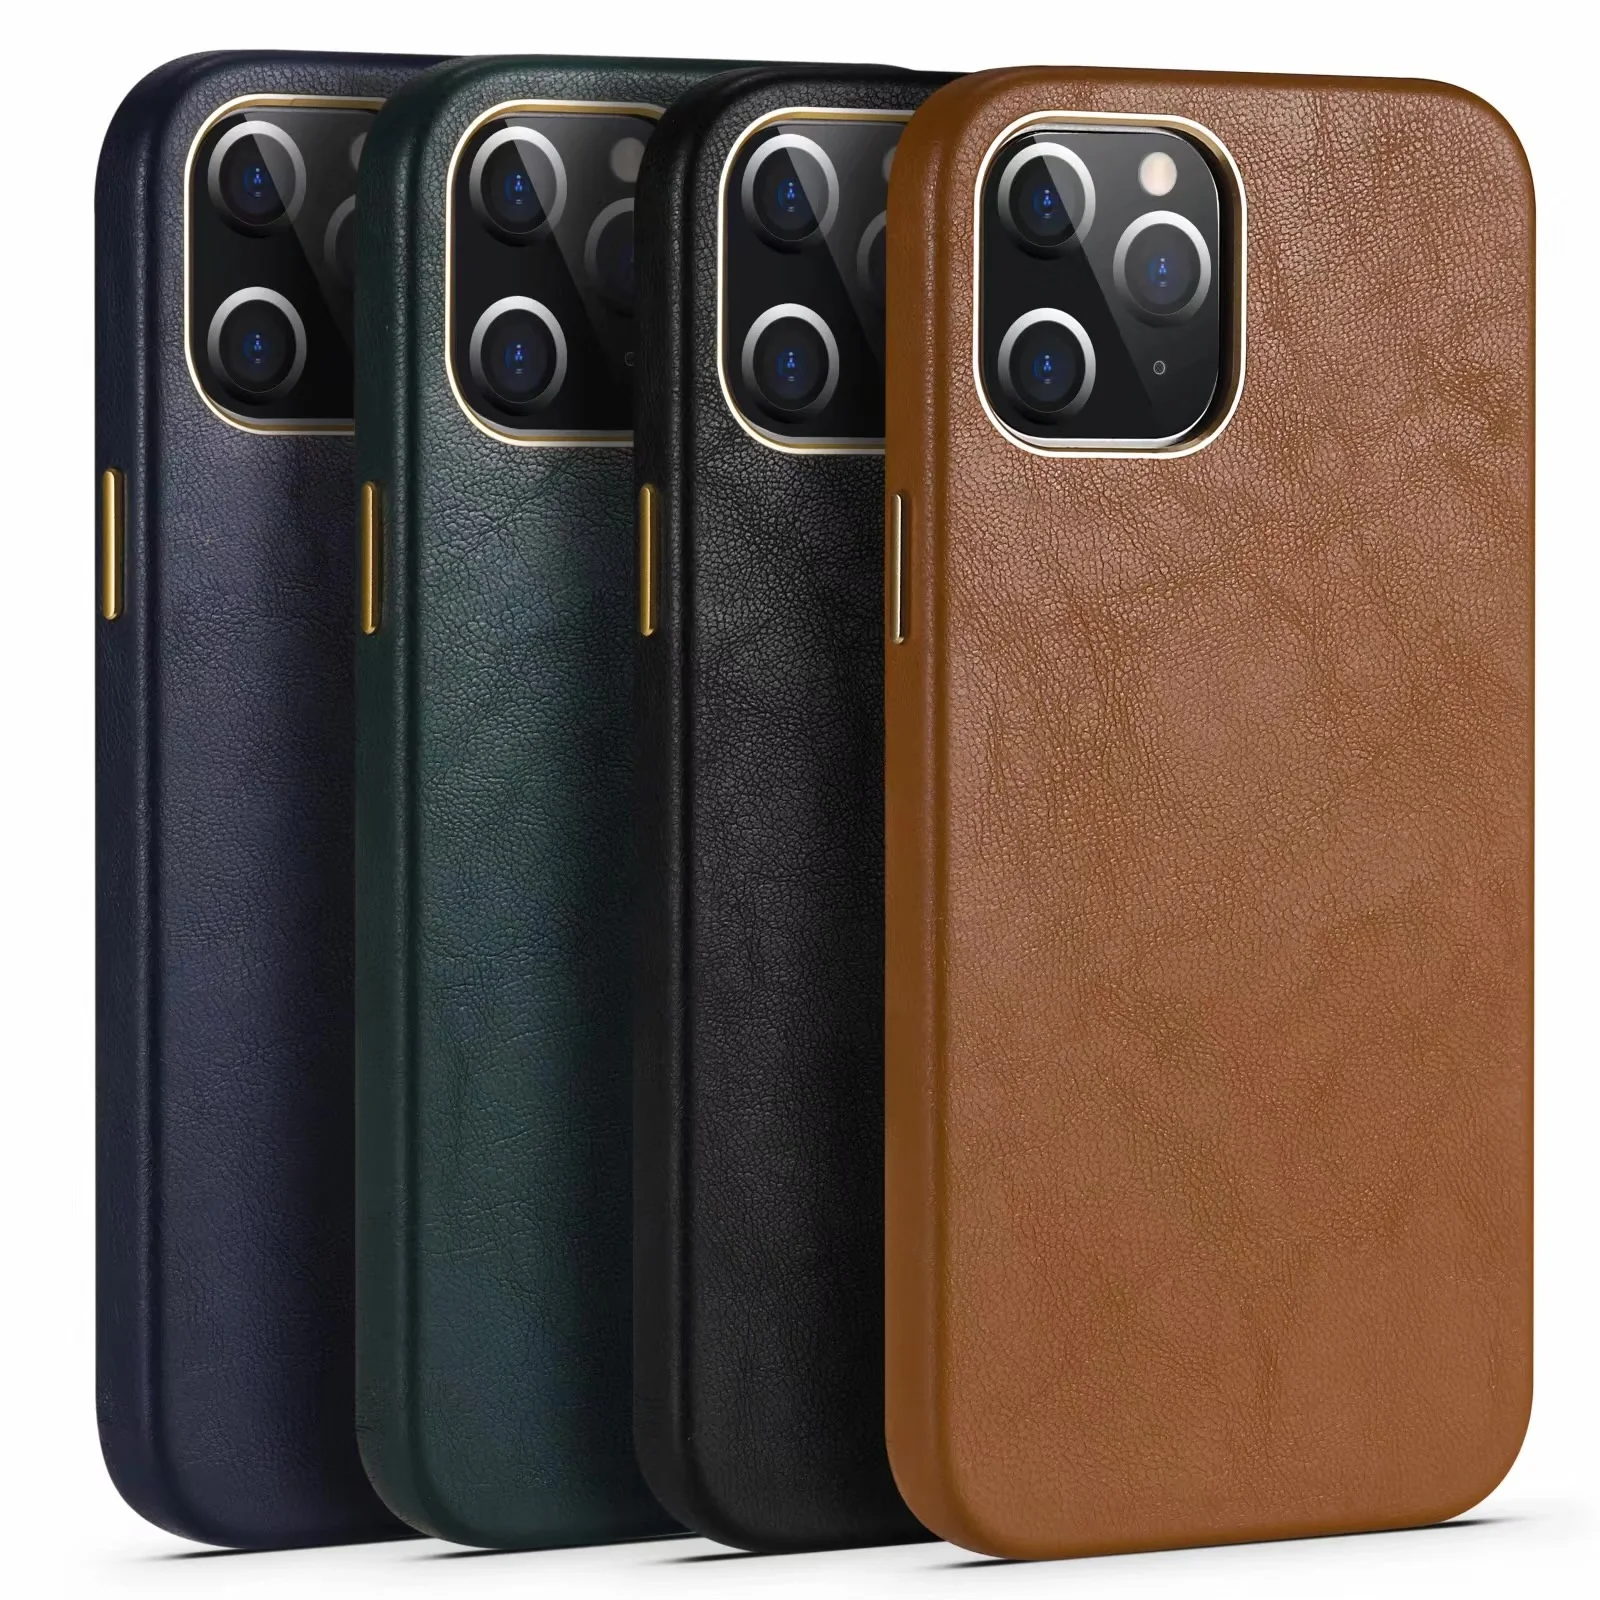 2023 New 100% Real Leather For Iphone 12 12Pro Mobile Phone Protective Back Cover 11 Pro X XR Max Phone Case Best On Sale Hot